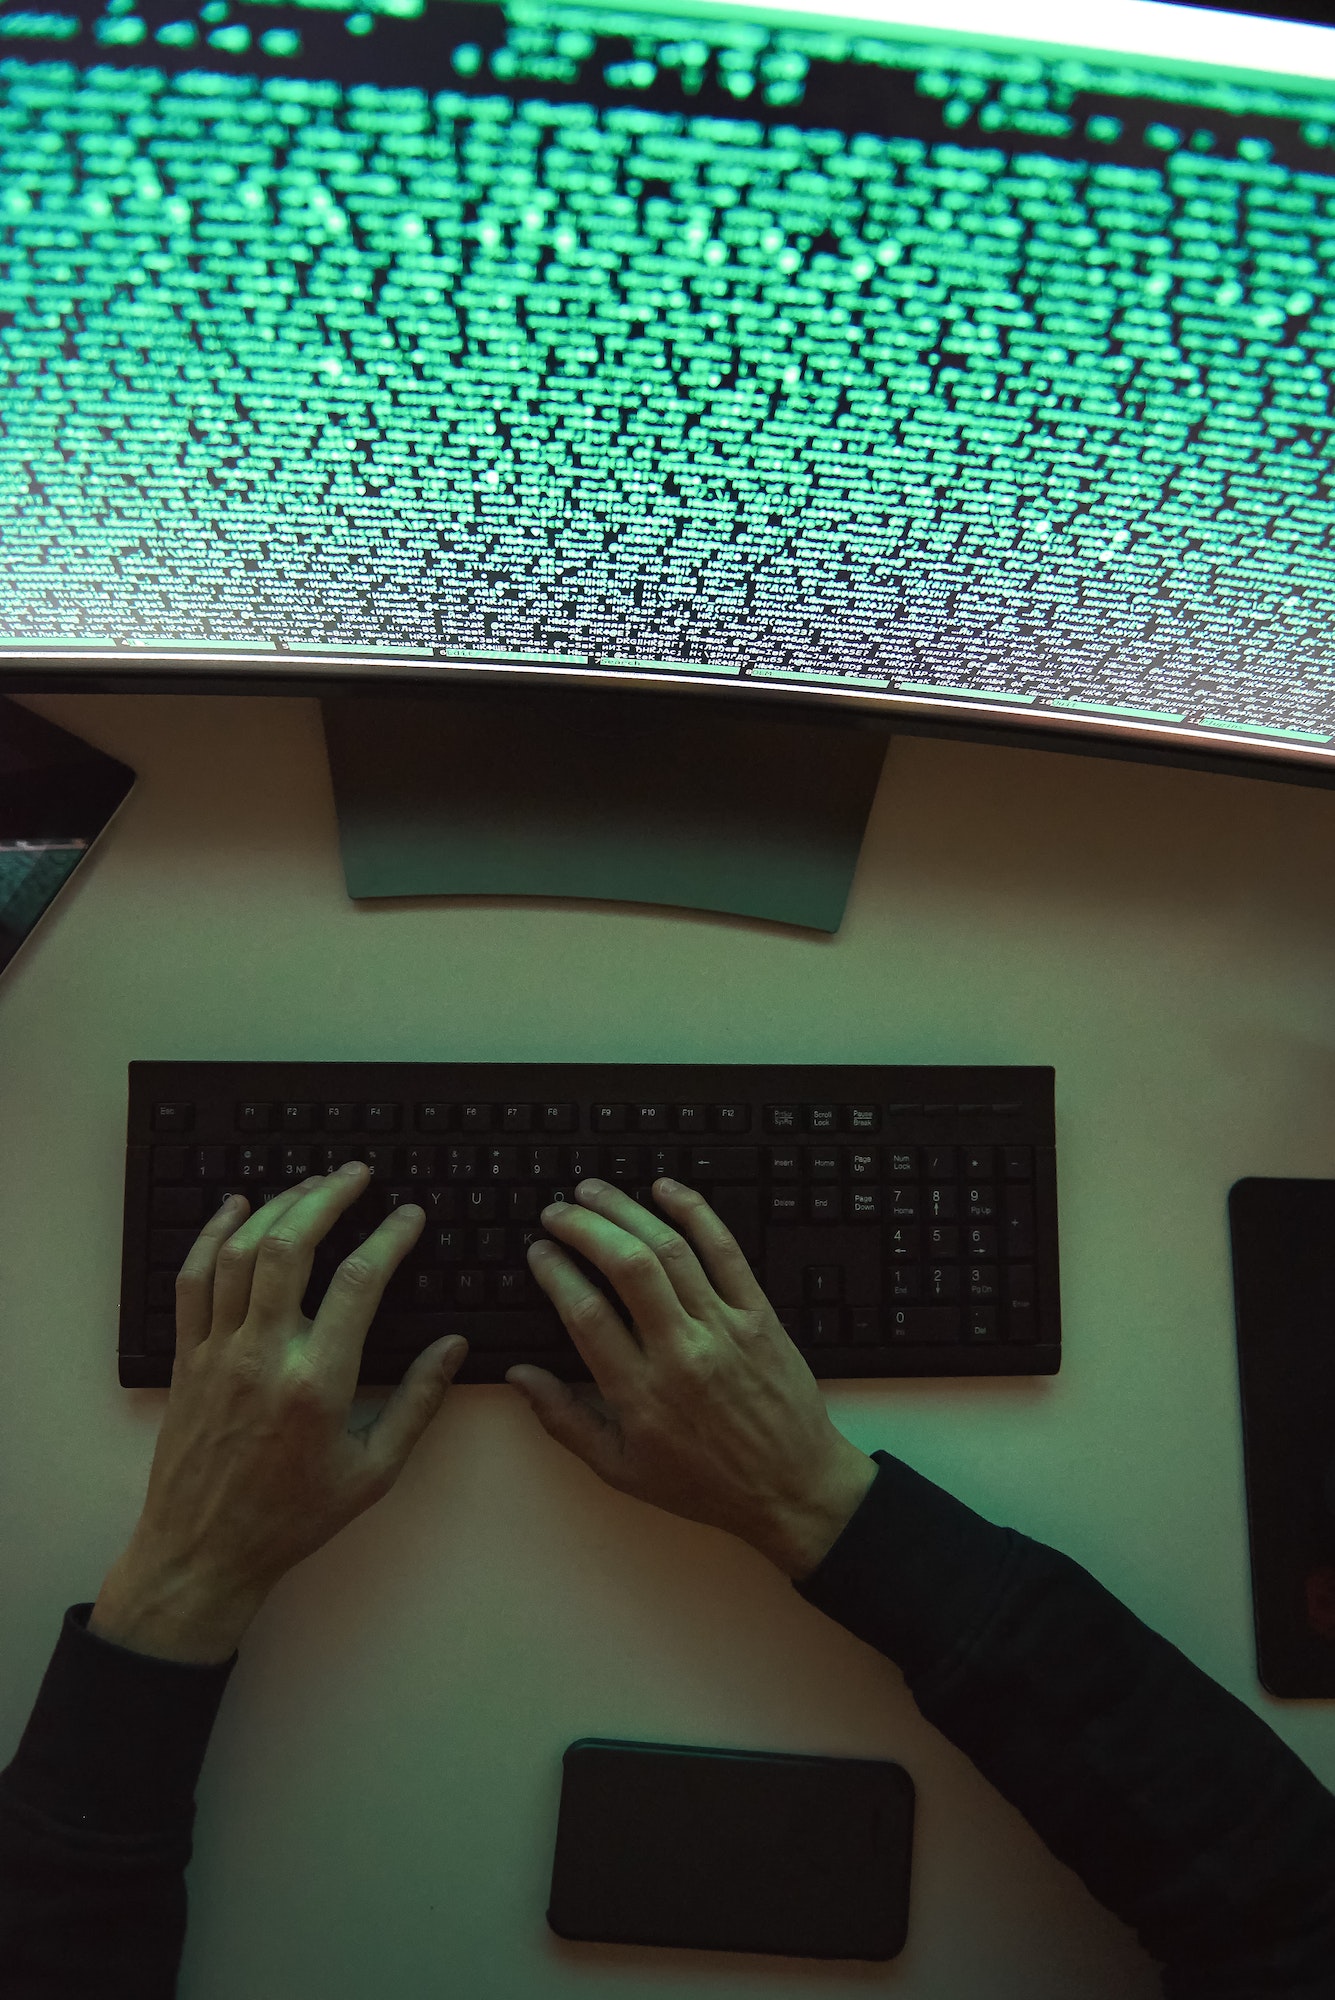 Data security. Top view of young hacker's hands stealing data while sitting in front of monitor